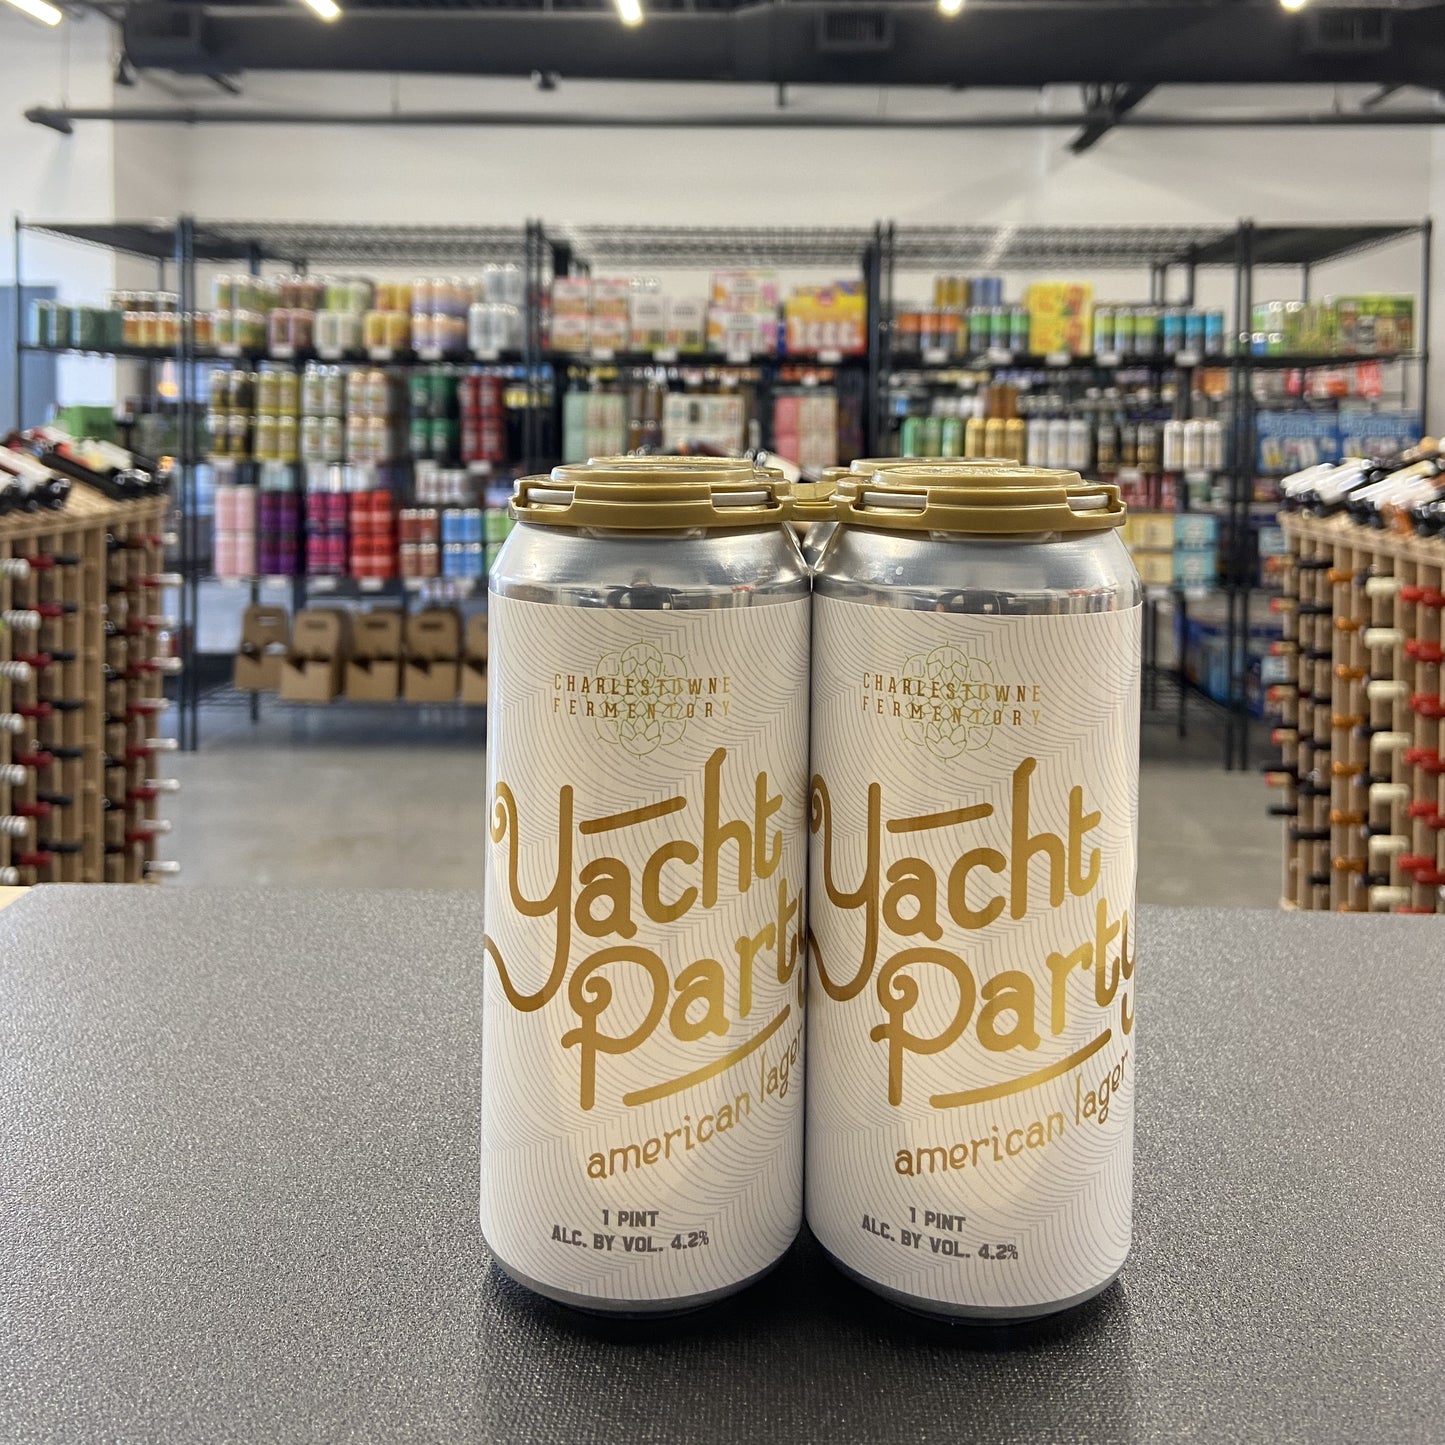 Charles Towne Fermentory Yacht Party